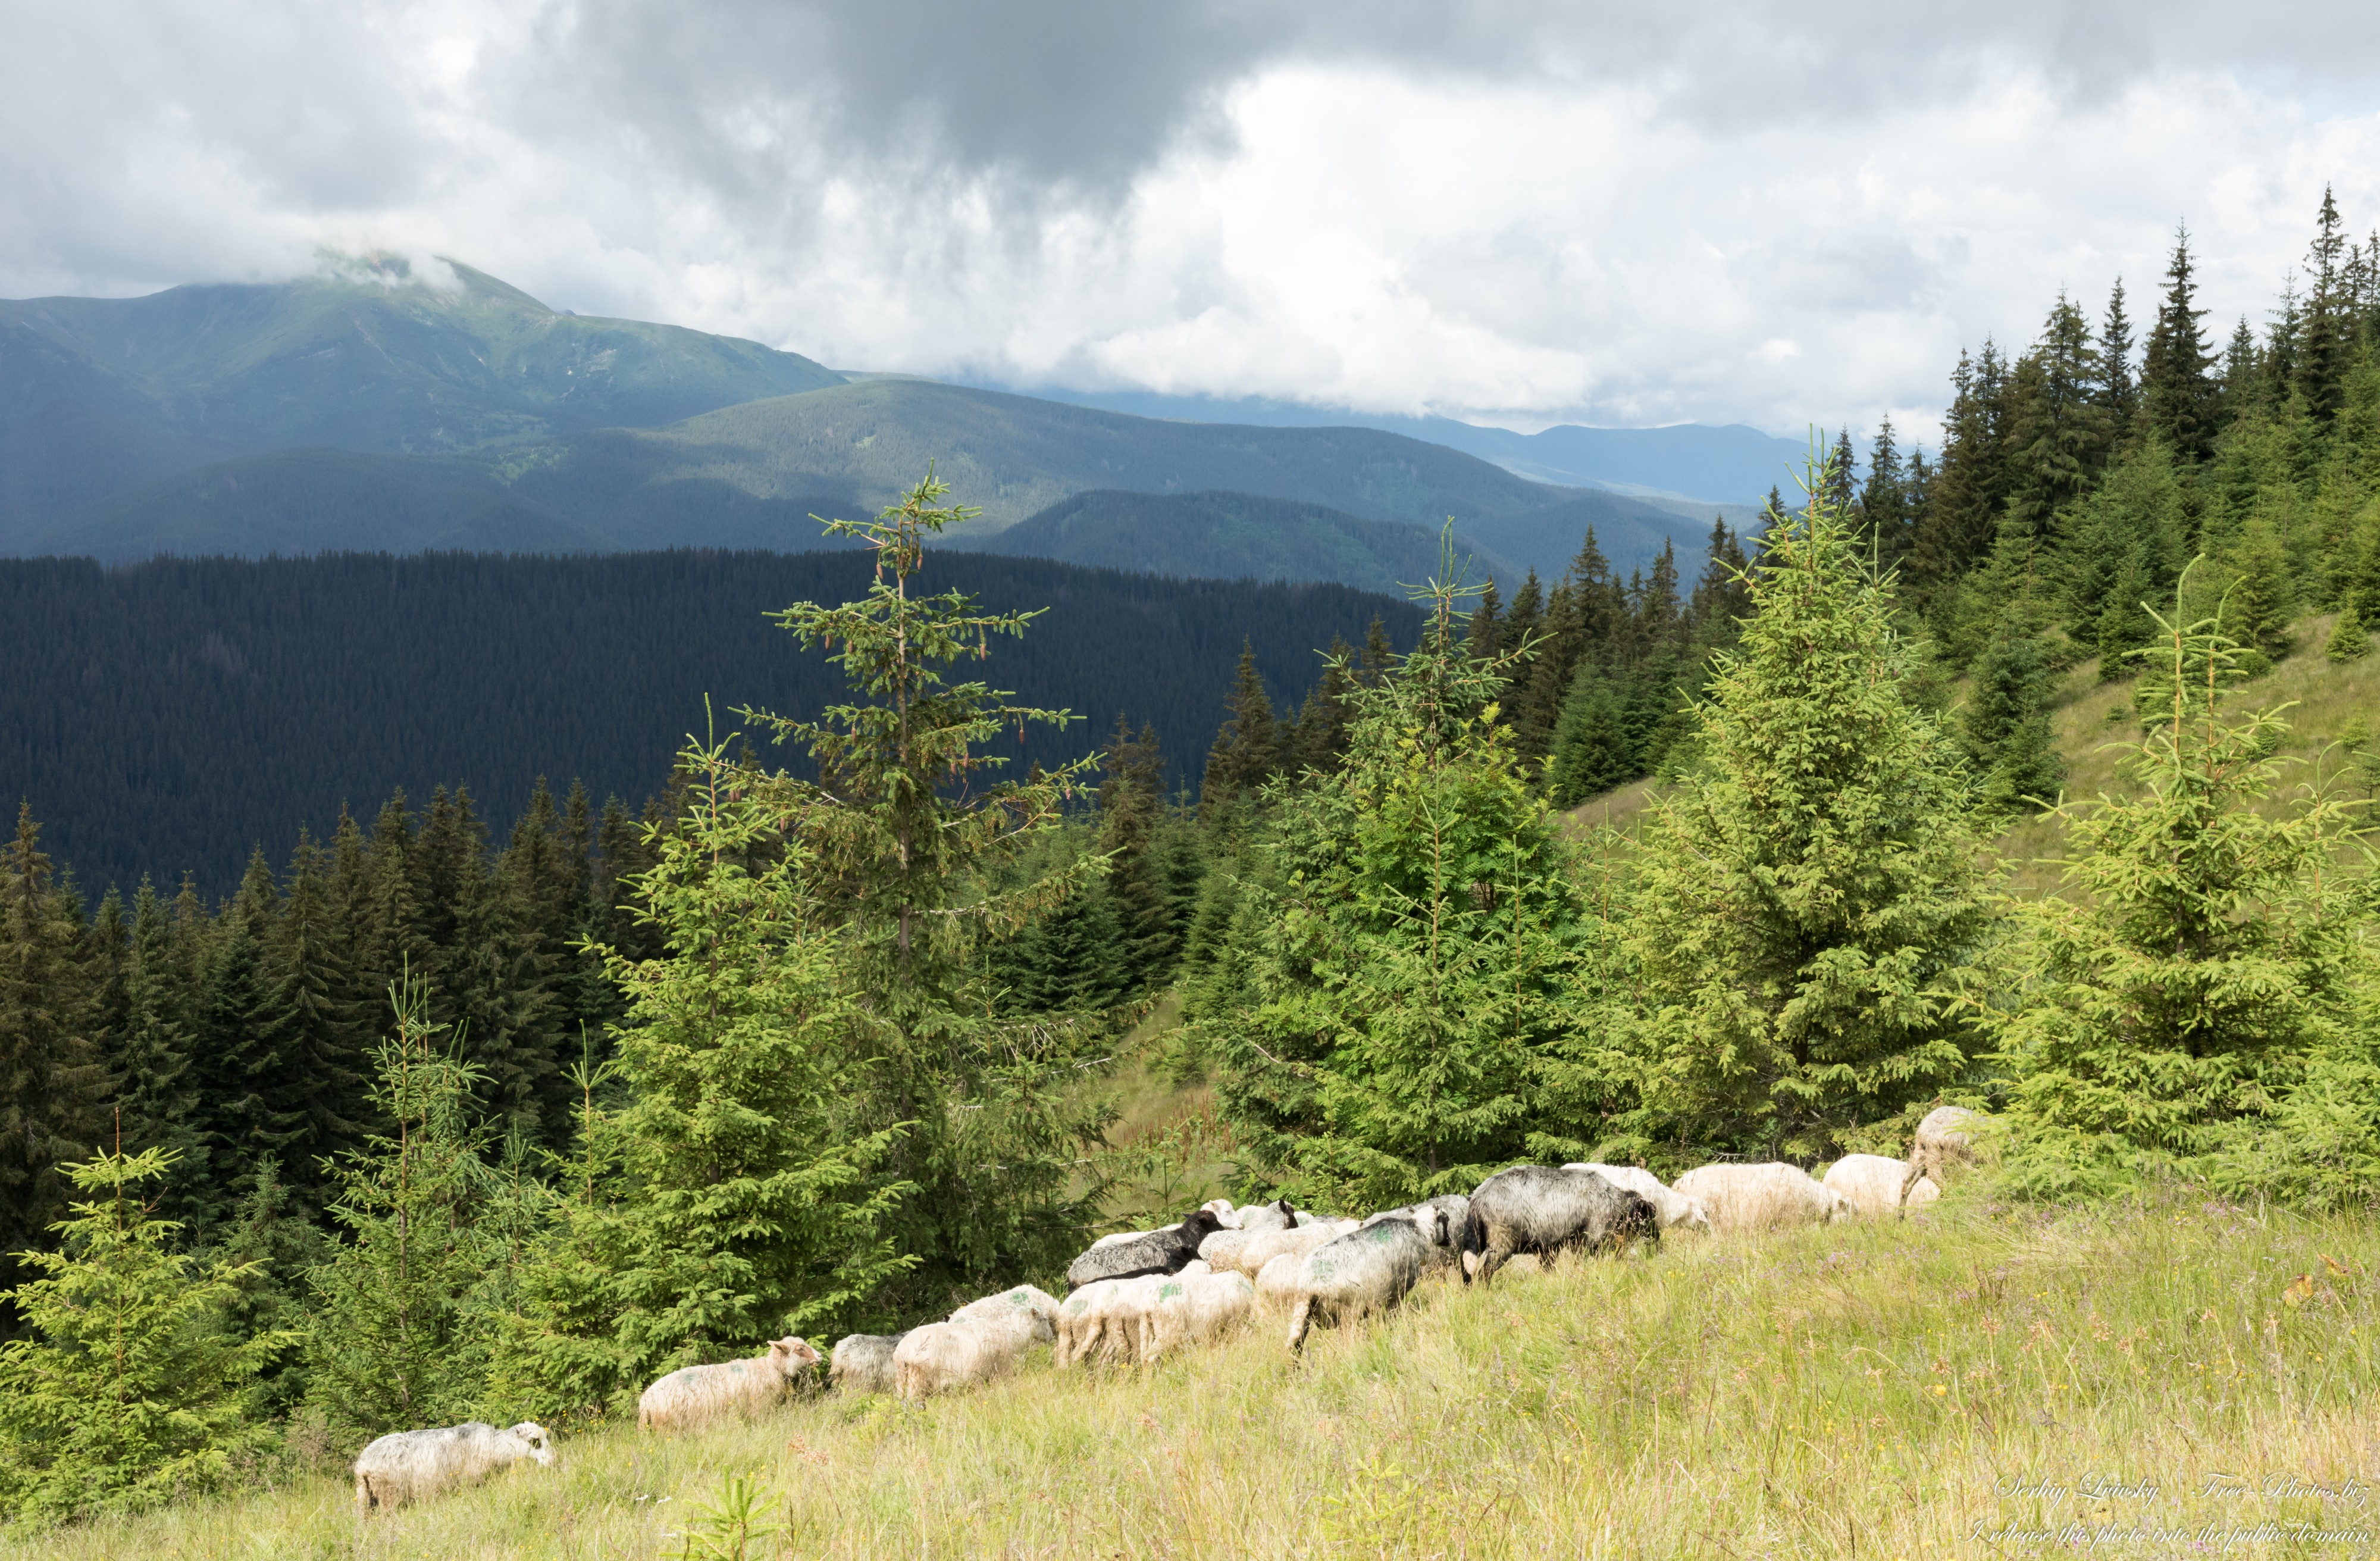 Carpathian mountains in Ukraine photographed in July 2022 by Serhiy Lvivsky, picture 9